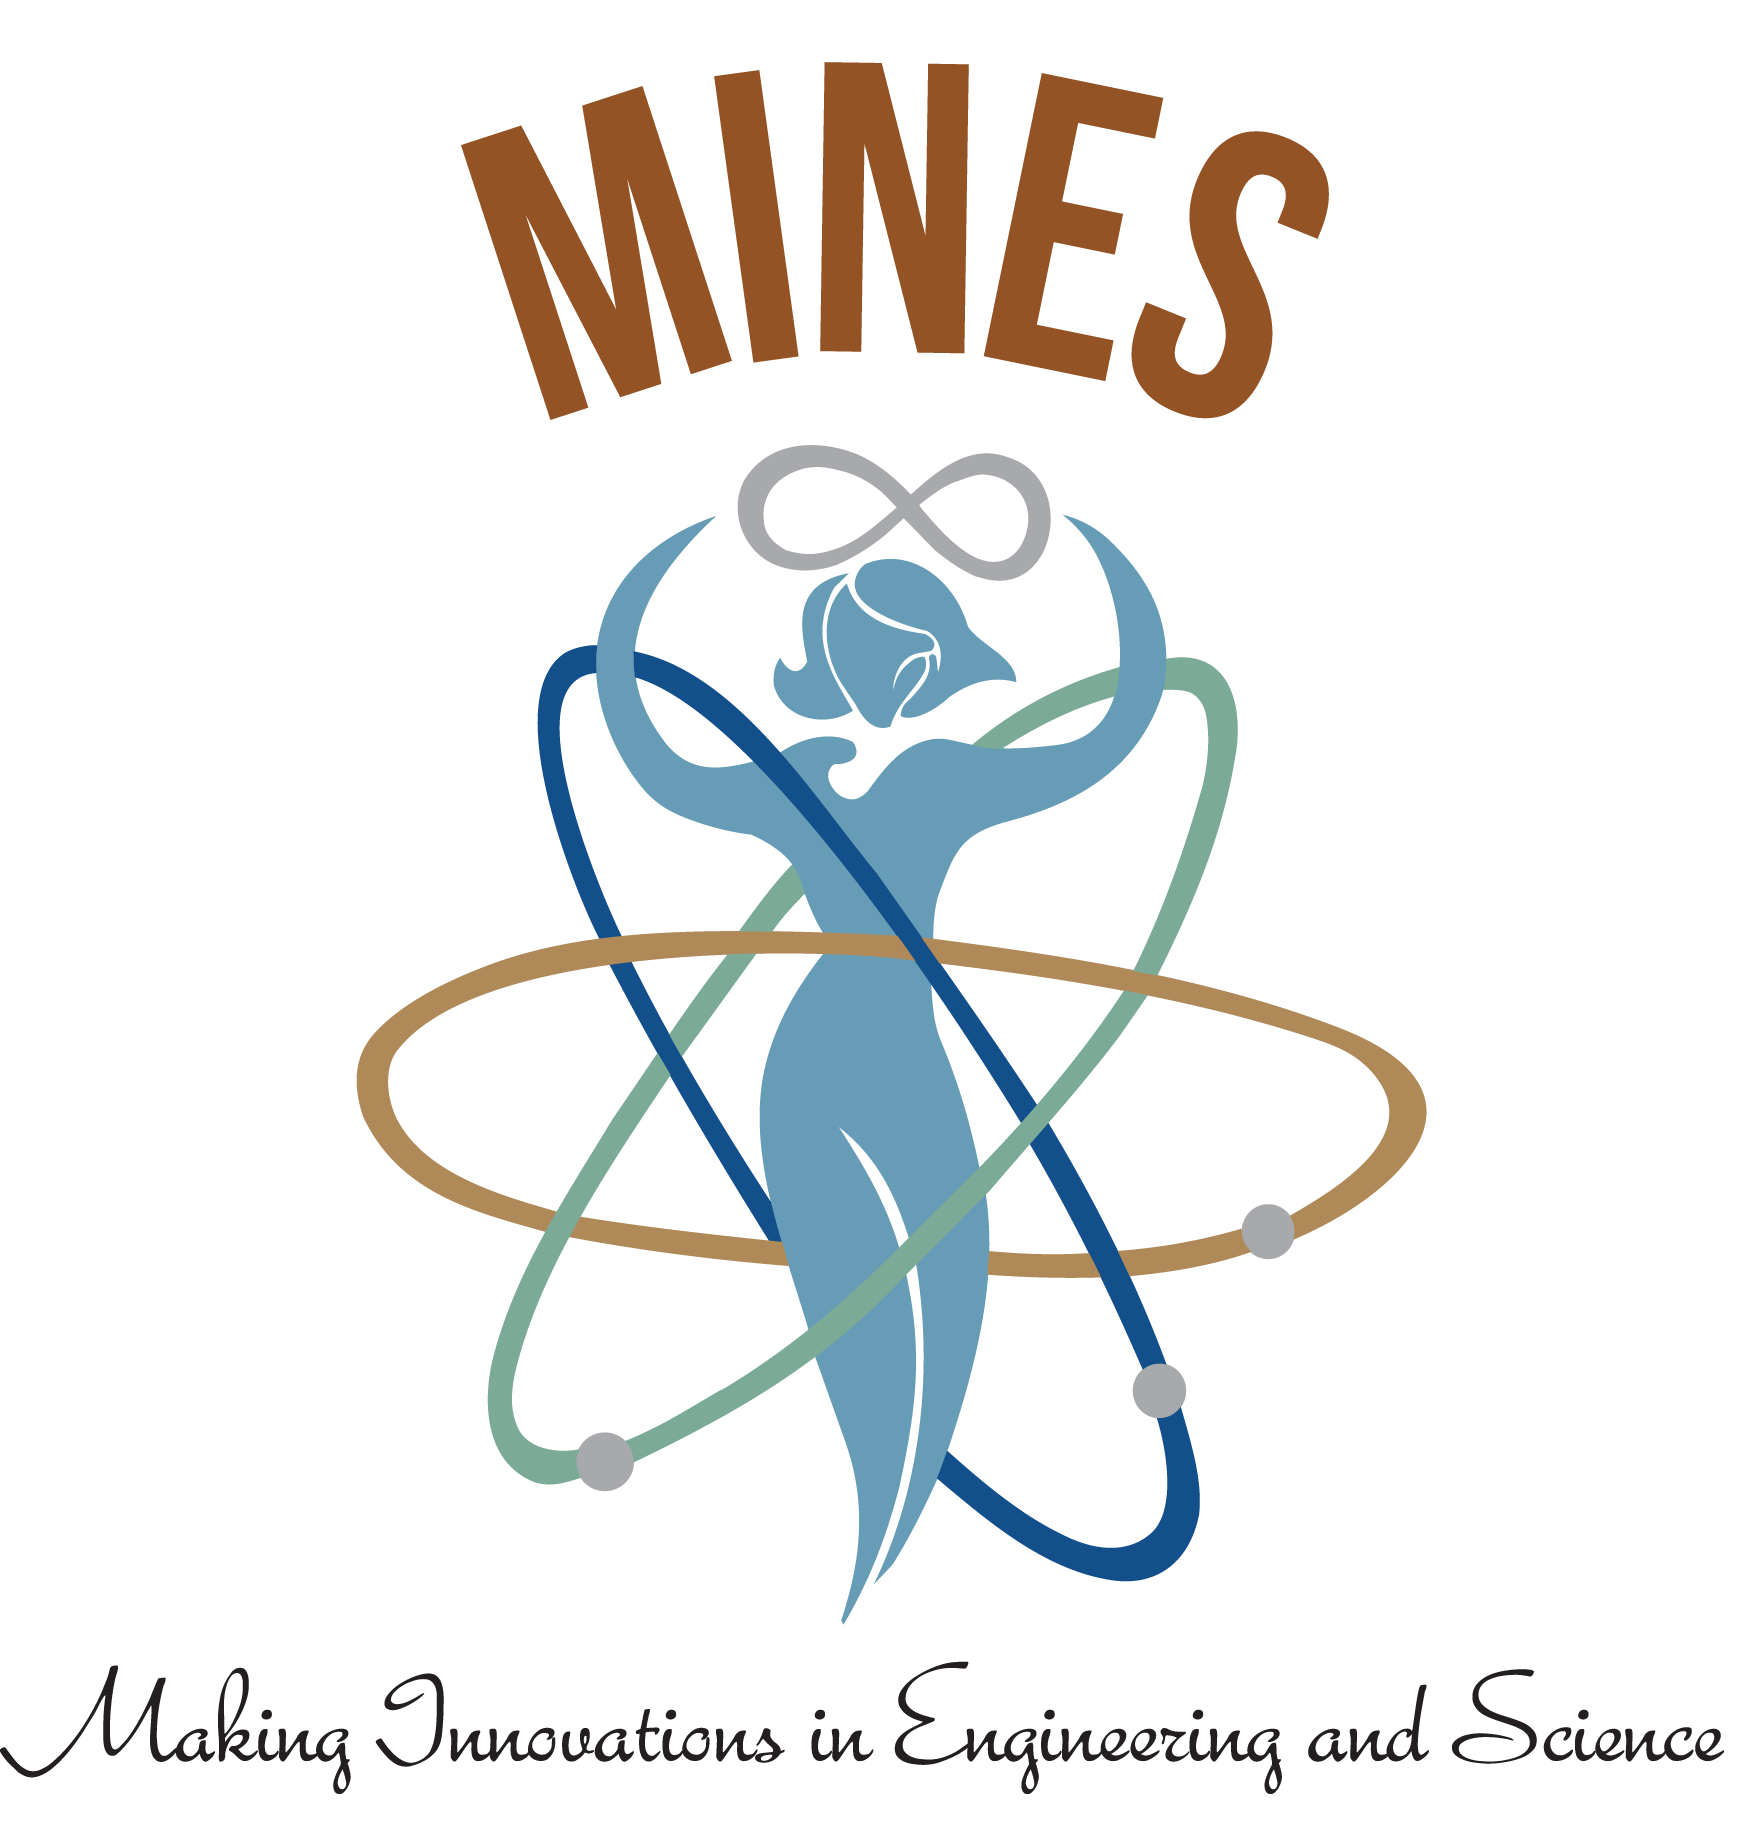  MINES - Summer Camp for Young Women